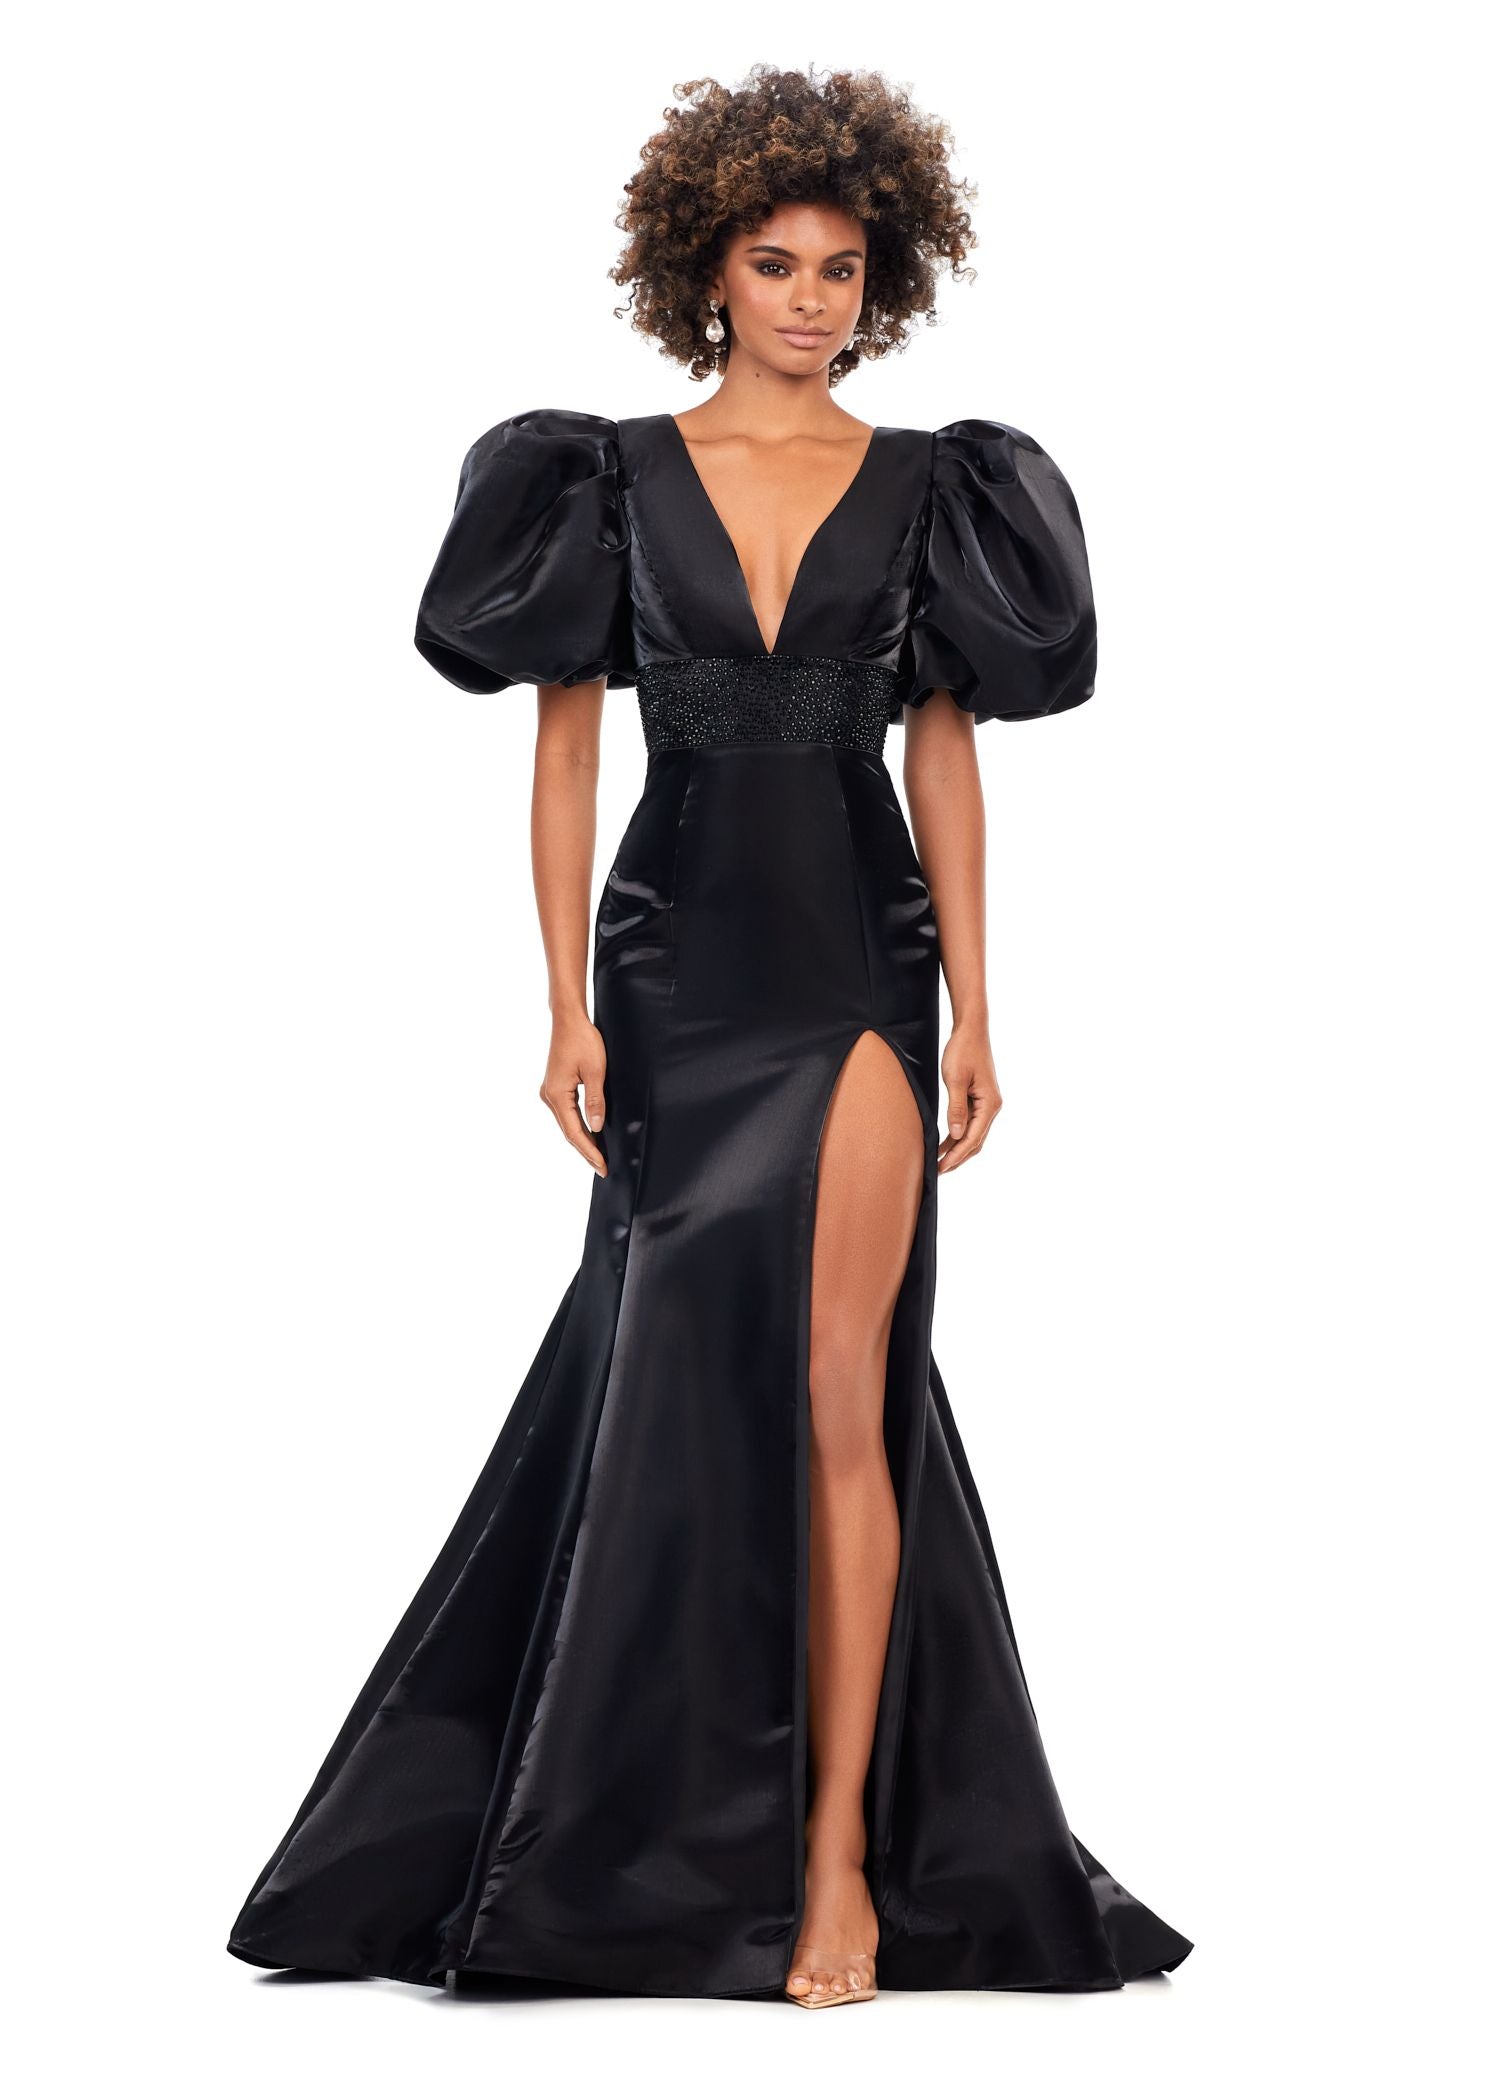 Black Lace Off-shoulder Sleeved Formal Ball Gown - Xdressy